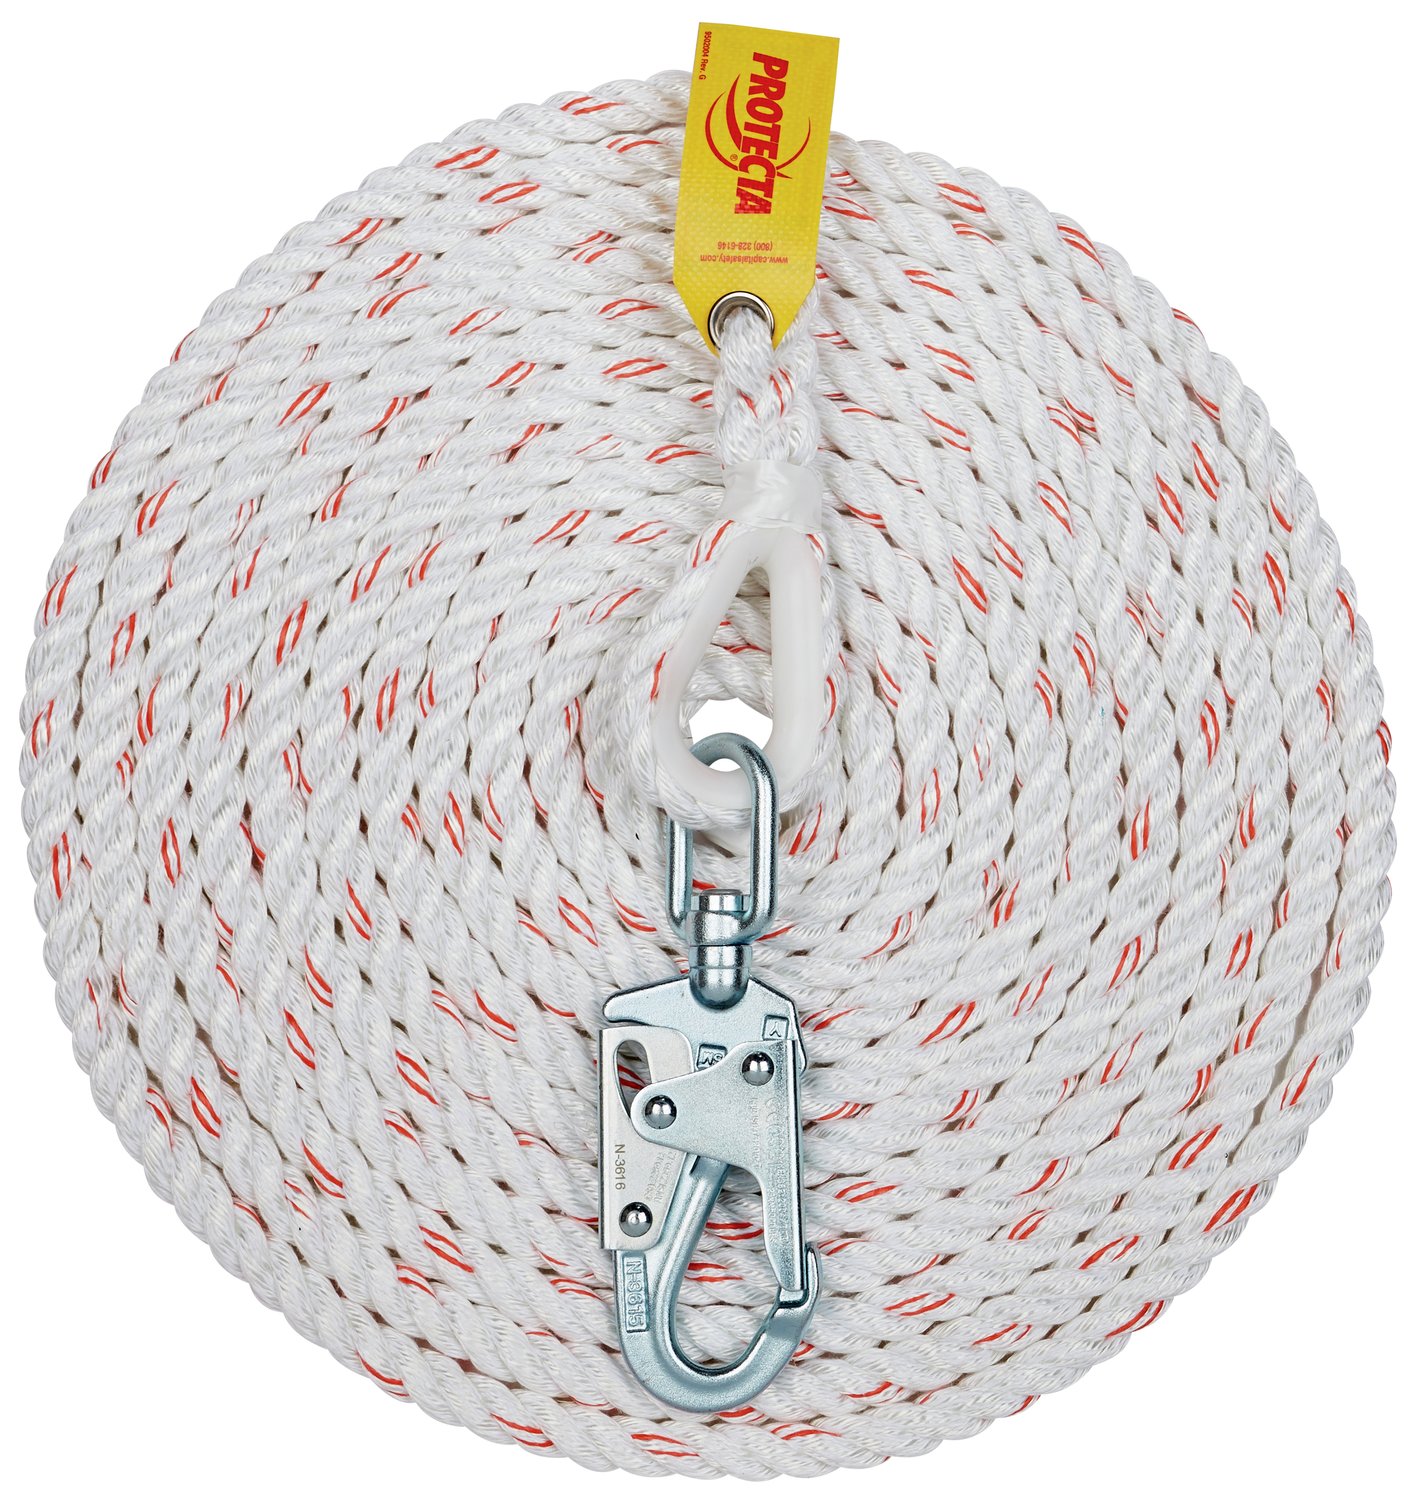 7012817331 - 3M Protecta Rope Lifeline with Swivel Snap Hook 1299996, 5/8 in Polyester and Polypropylene Blend, White, 25 ft